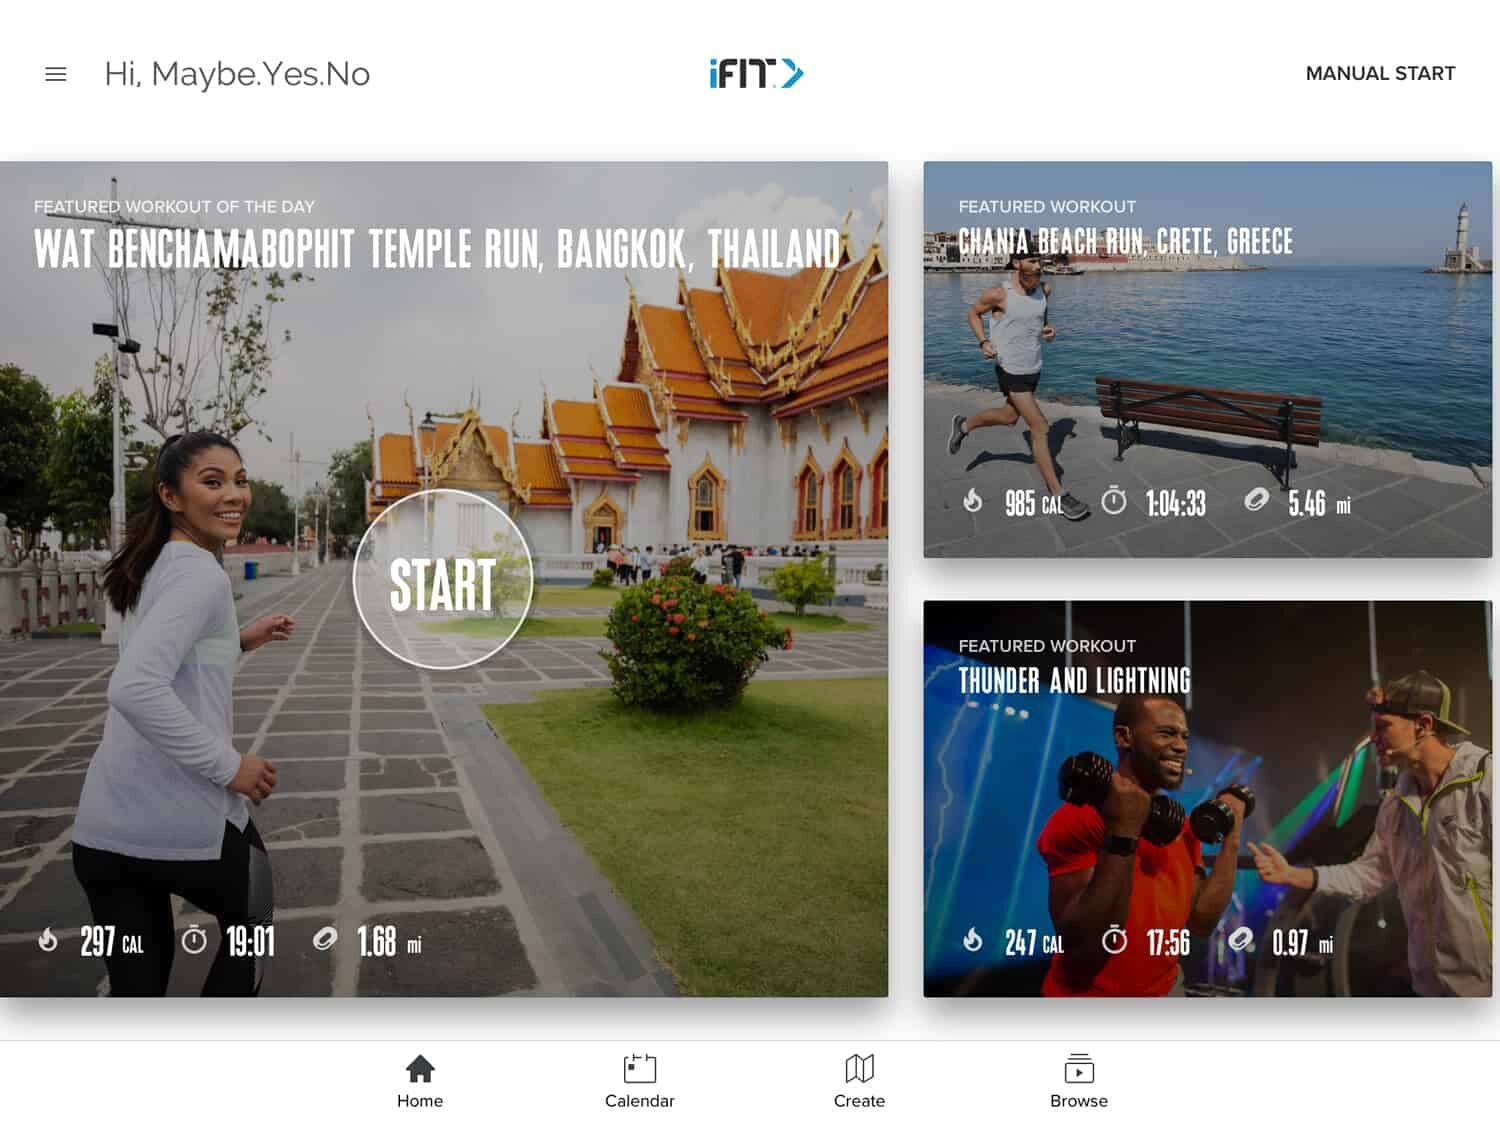 ifit-featured-workout-of-the-day-thailand.jpg